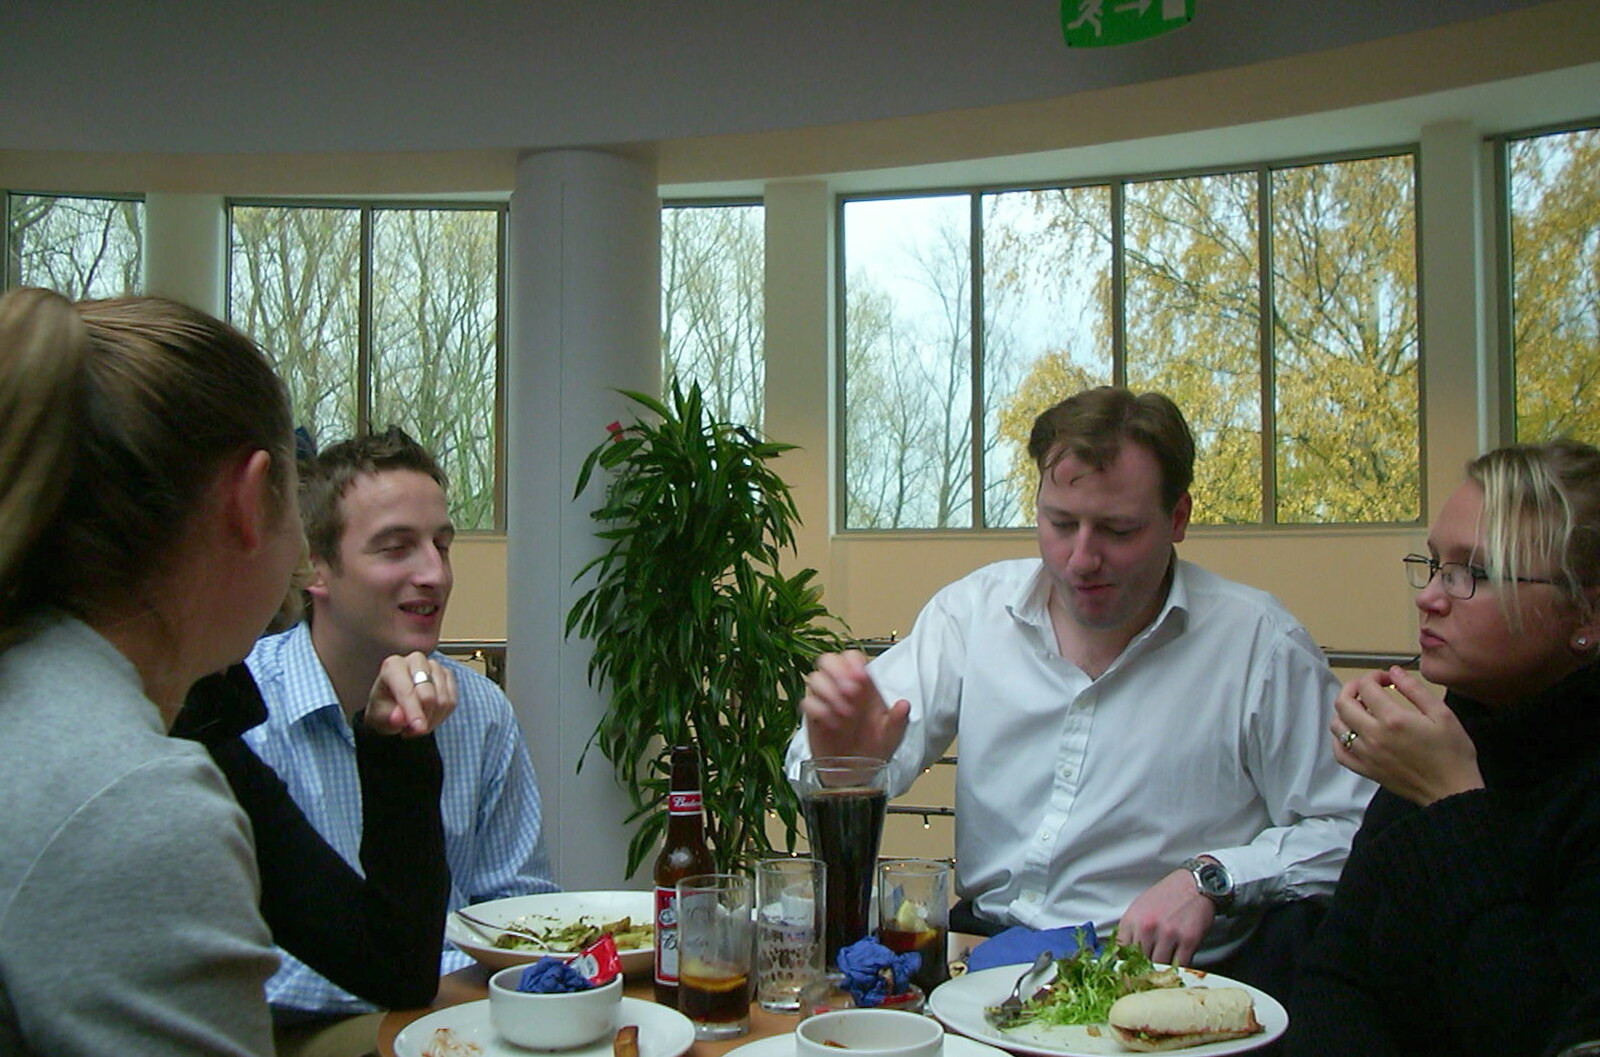 Lunch in the Q-Ton on the Science Park from The 3G Lab Press Tour: Munich, Germany - 14th March 2001